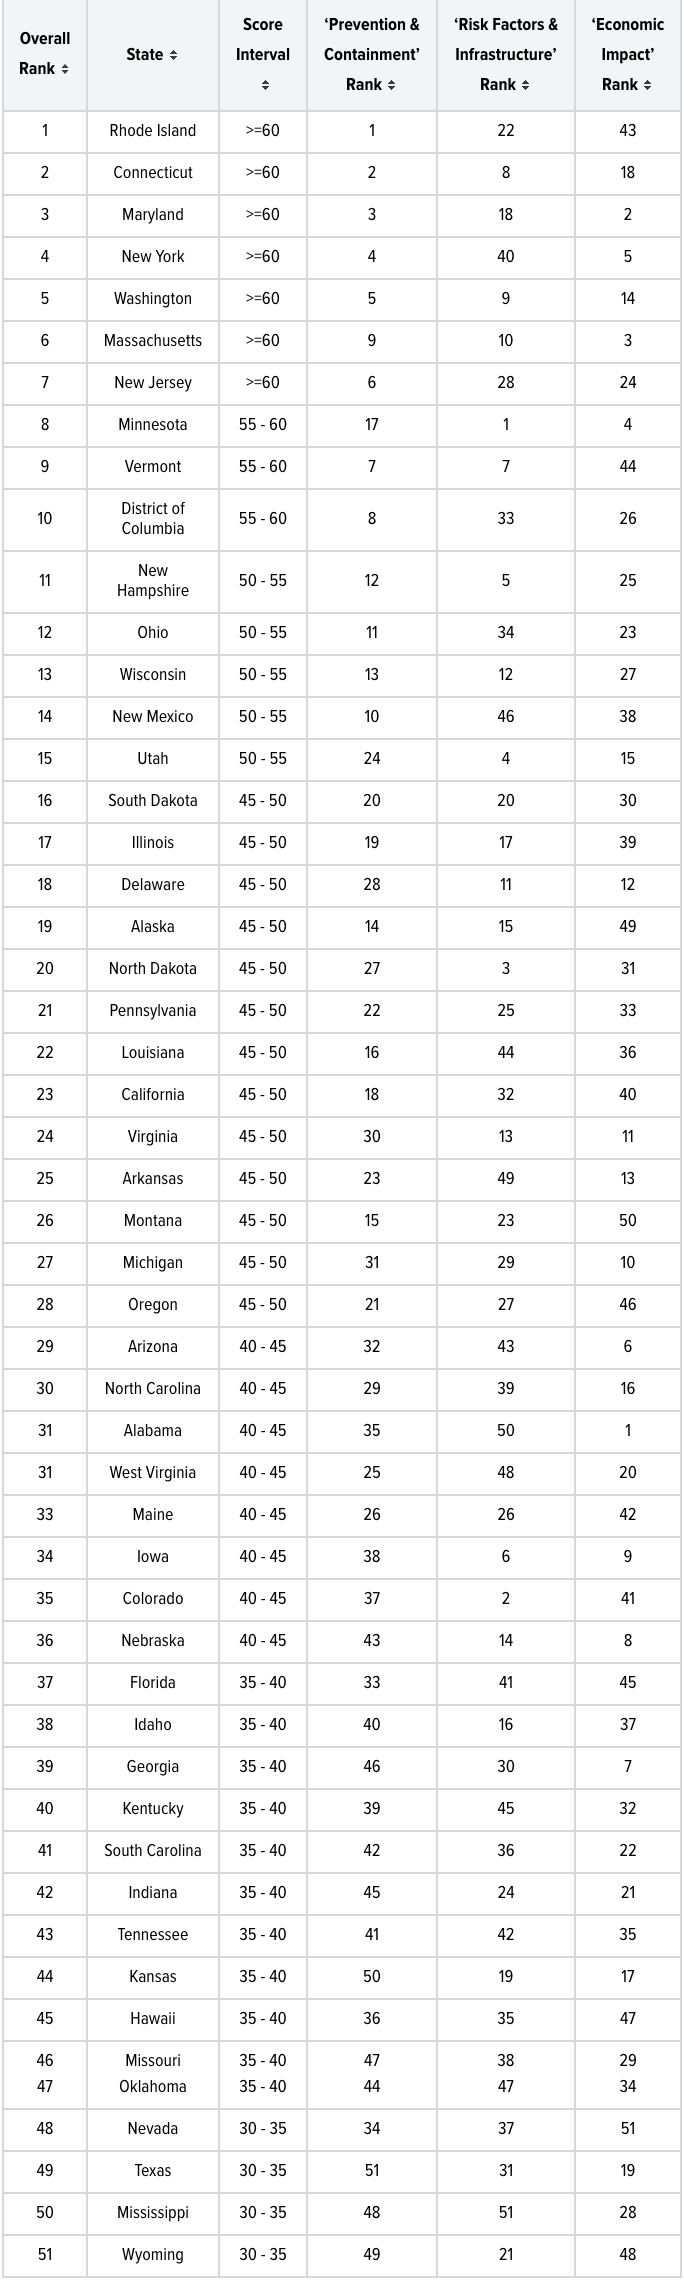 Florida Ranks a Dismal 37th Overall in Most Aggressive States Limiting Exposure of Covid-19 1